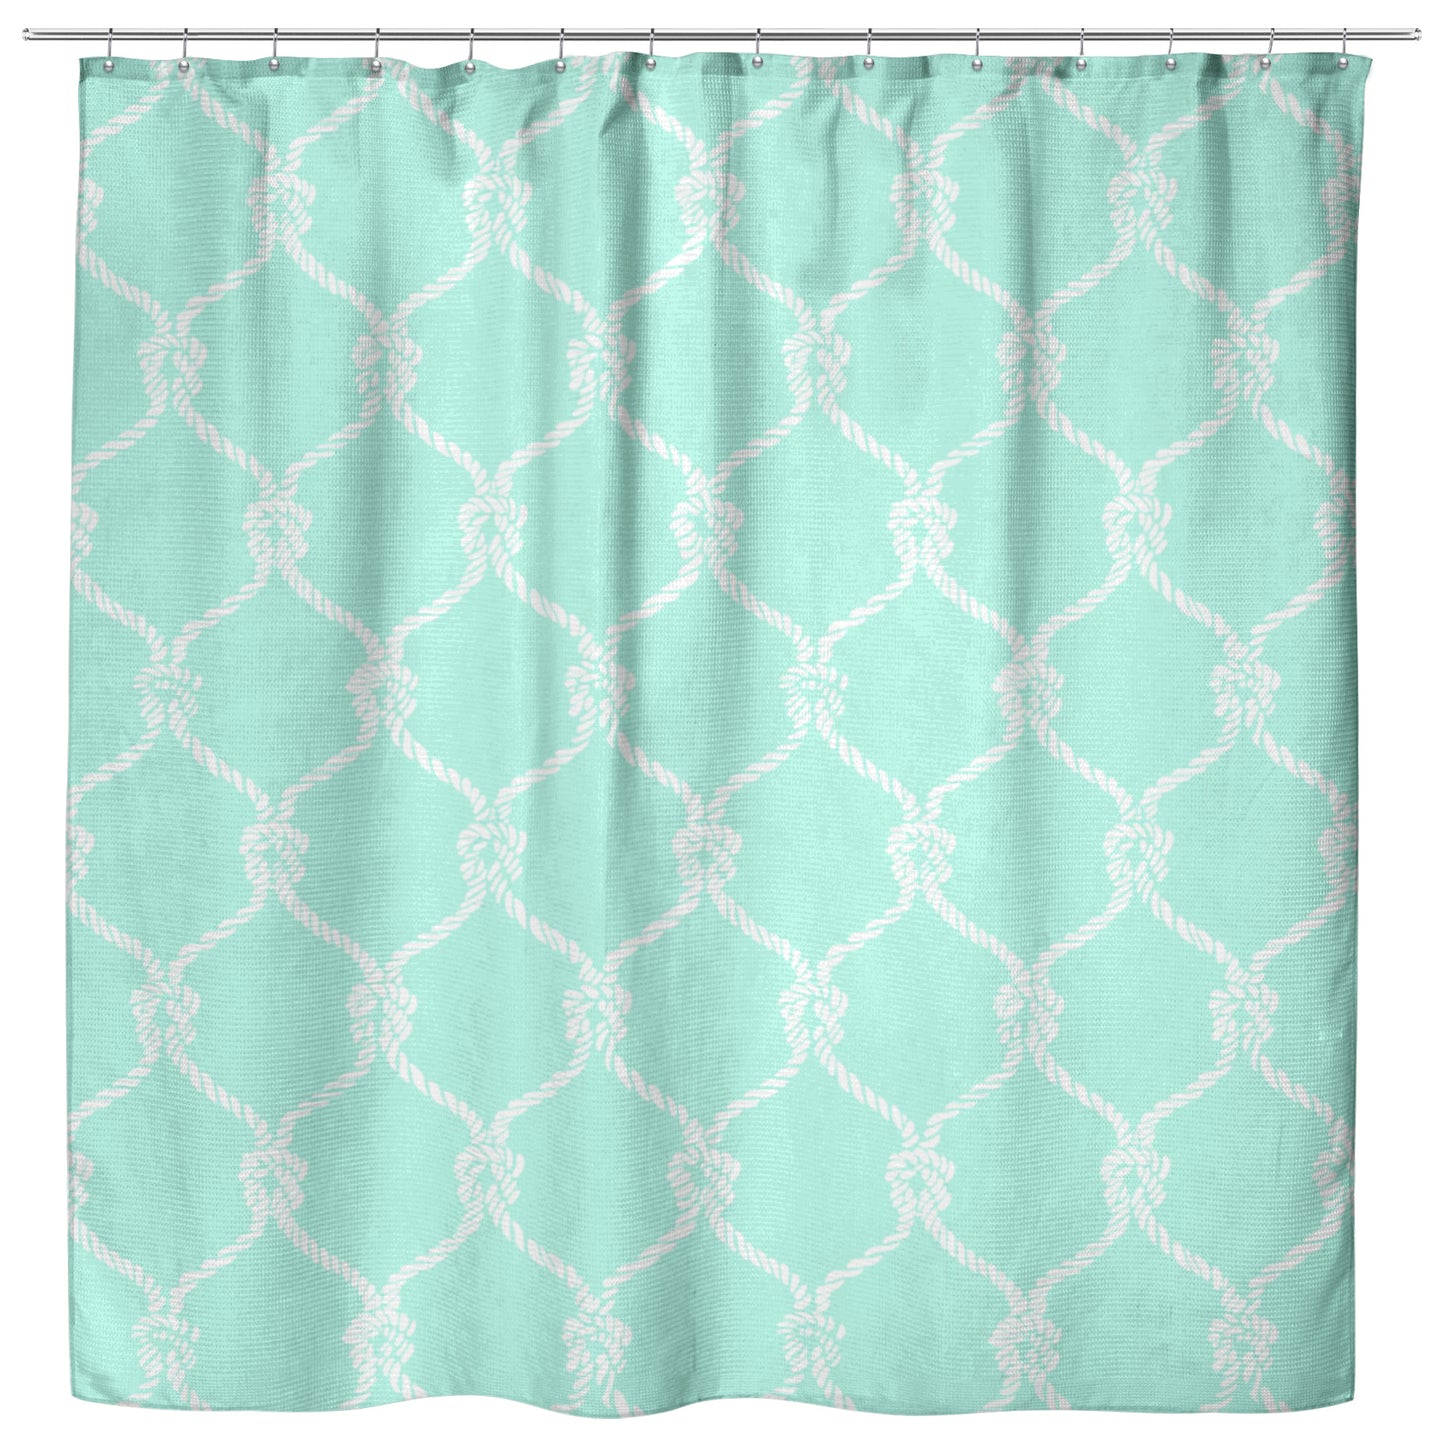 Nautical Netting on Mint Background, Shower Curtain